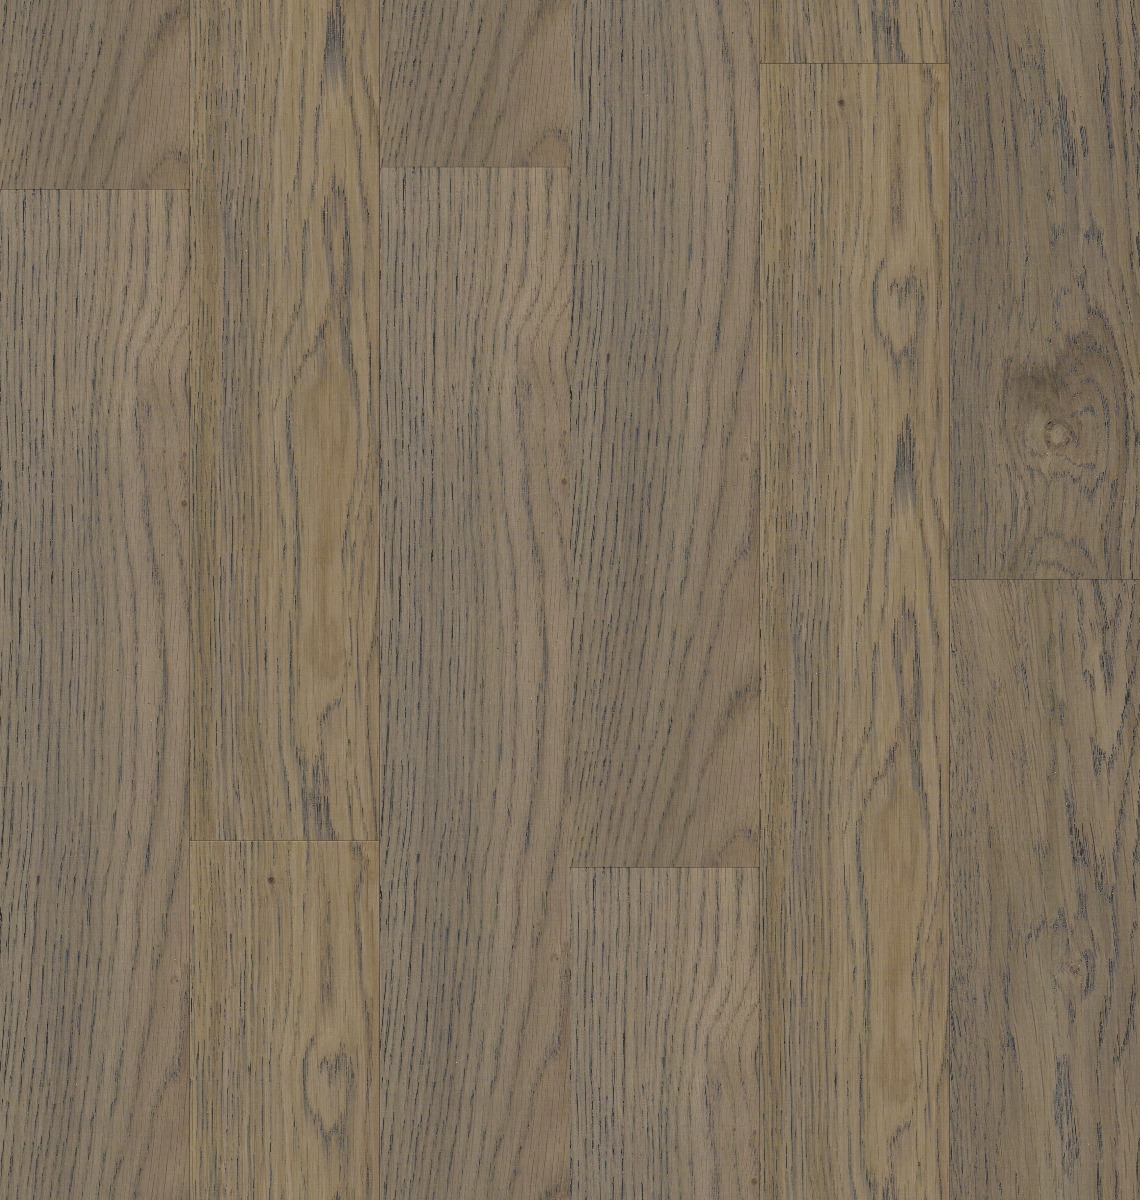 A seamless wood texture with expressive 55136 boards arranged in a Staggered pattern